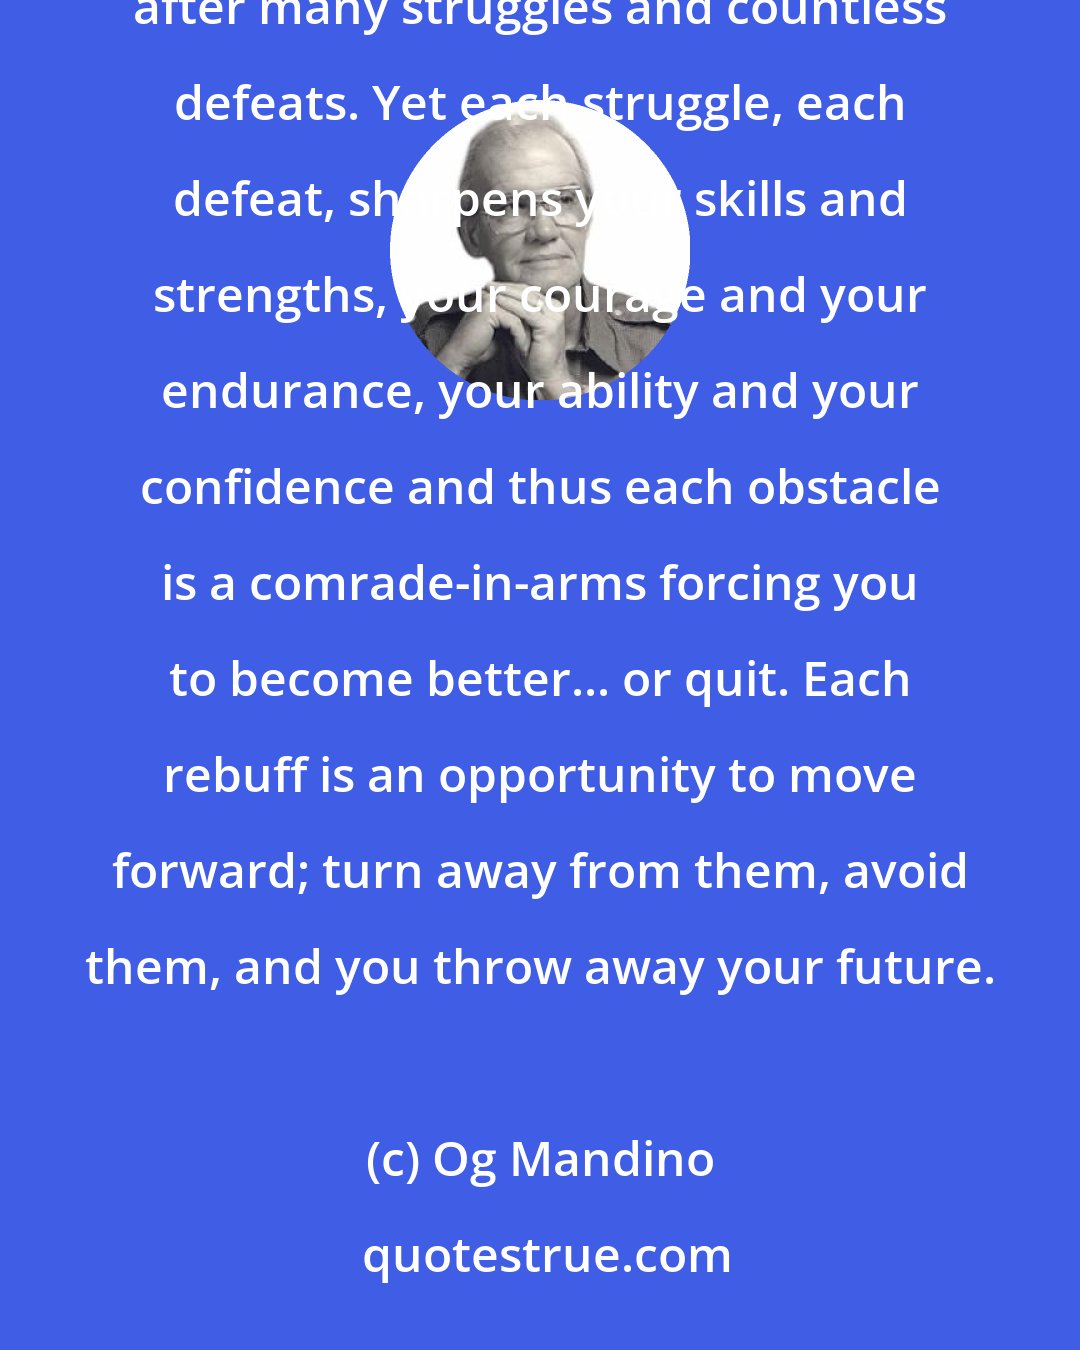 Og Mandino: Obstacles are necessary for success because in selling, as in all careers of importance, victory comes only after many struggles and countless defeats. Yet each struggle, each defeat, sharpens your skills and strengths, your courage and your endurance, your ability and your confidence and thus each obstacle is a comrade-in-arms forcing you to become better... or quit. Each rebuff is an opportunity to move forward; turn away from them, avoid them, and you throw away your future.